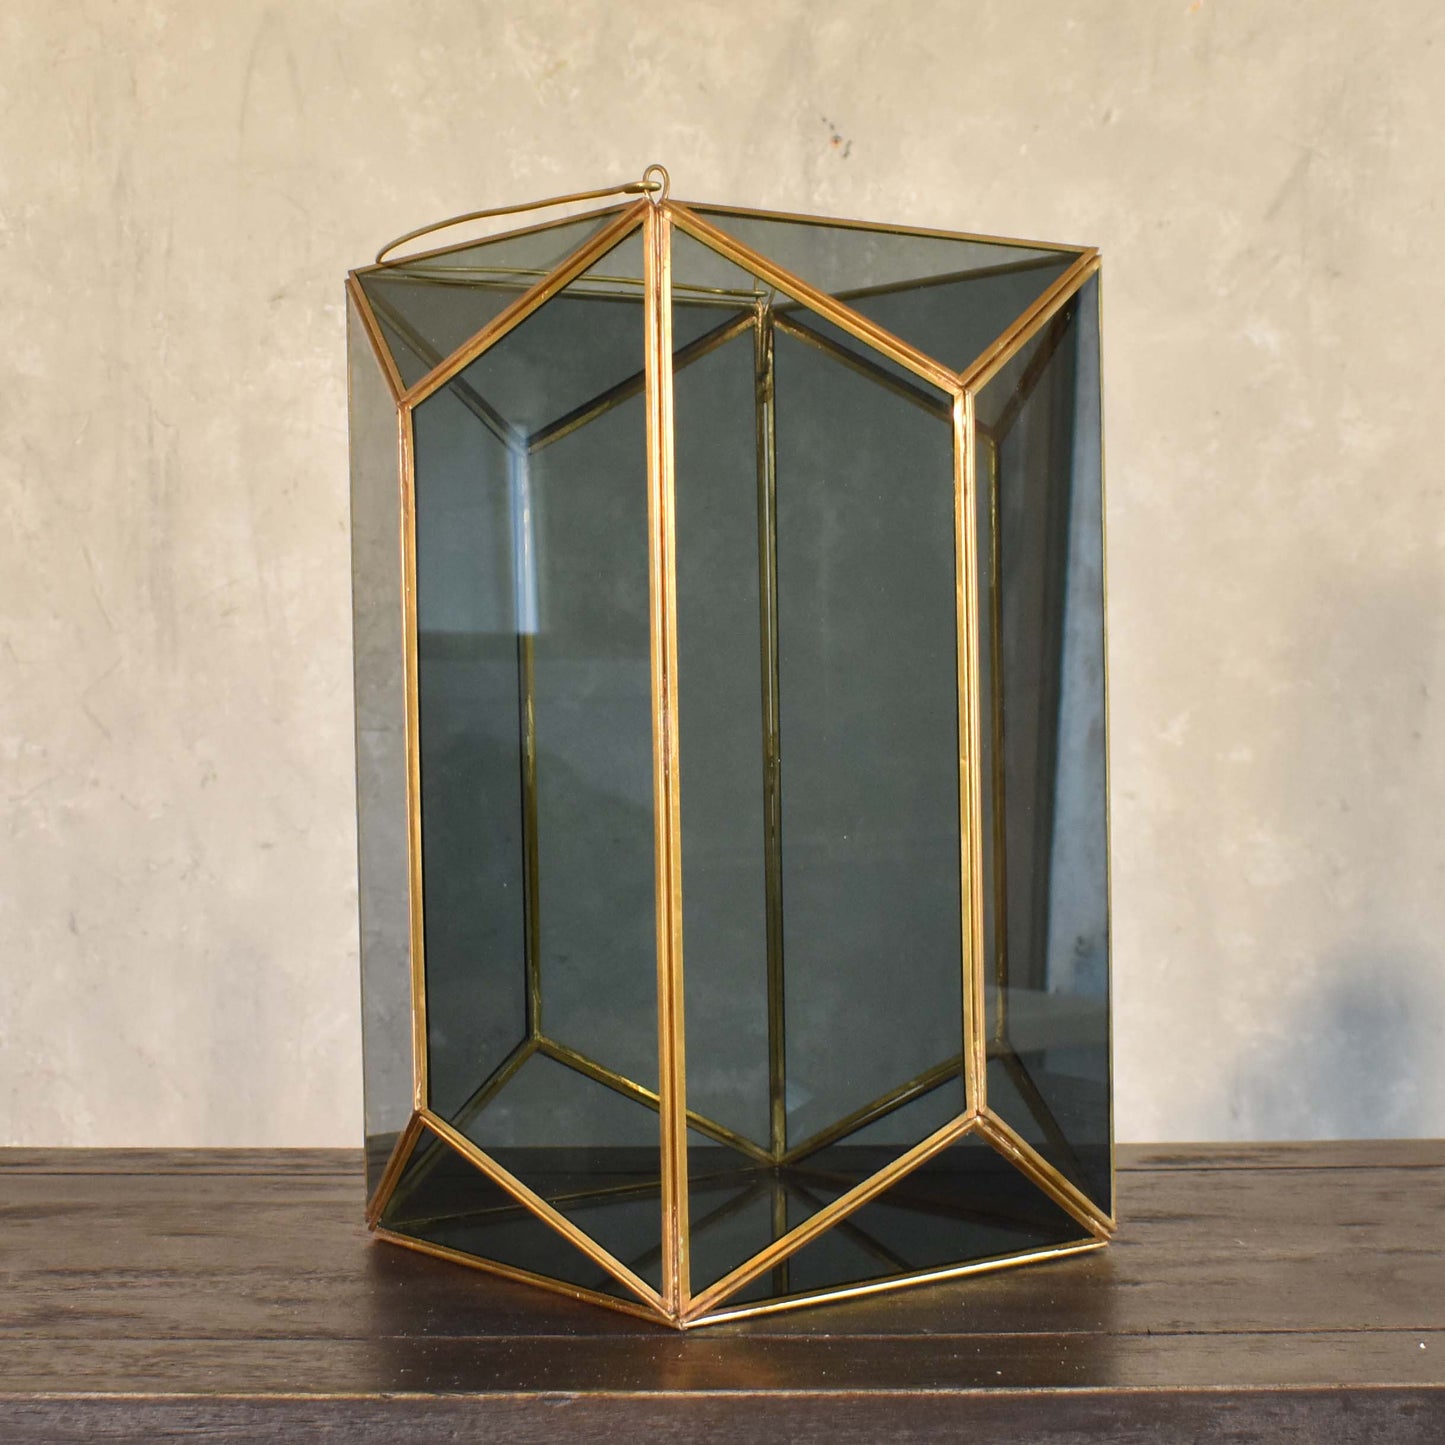 Small Noble Lantern with Smoky Glass | DCH